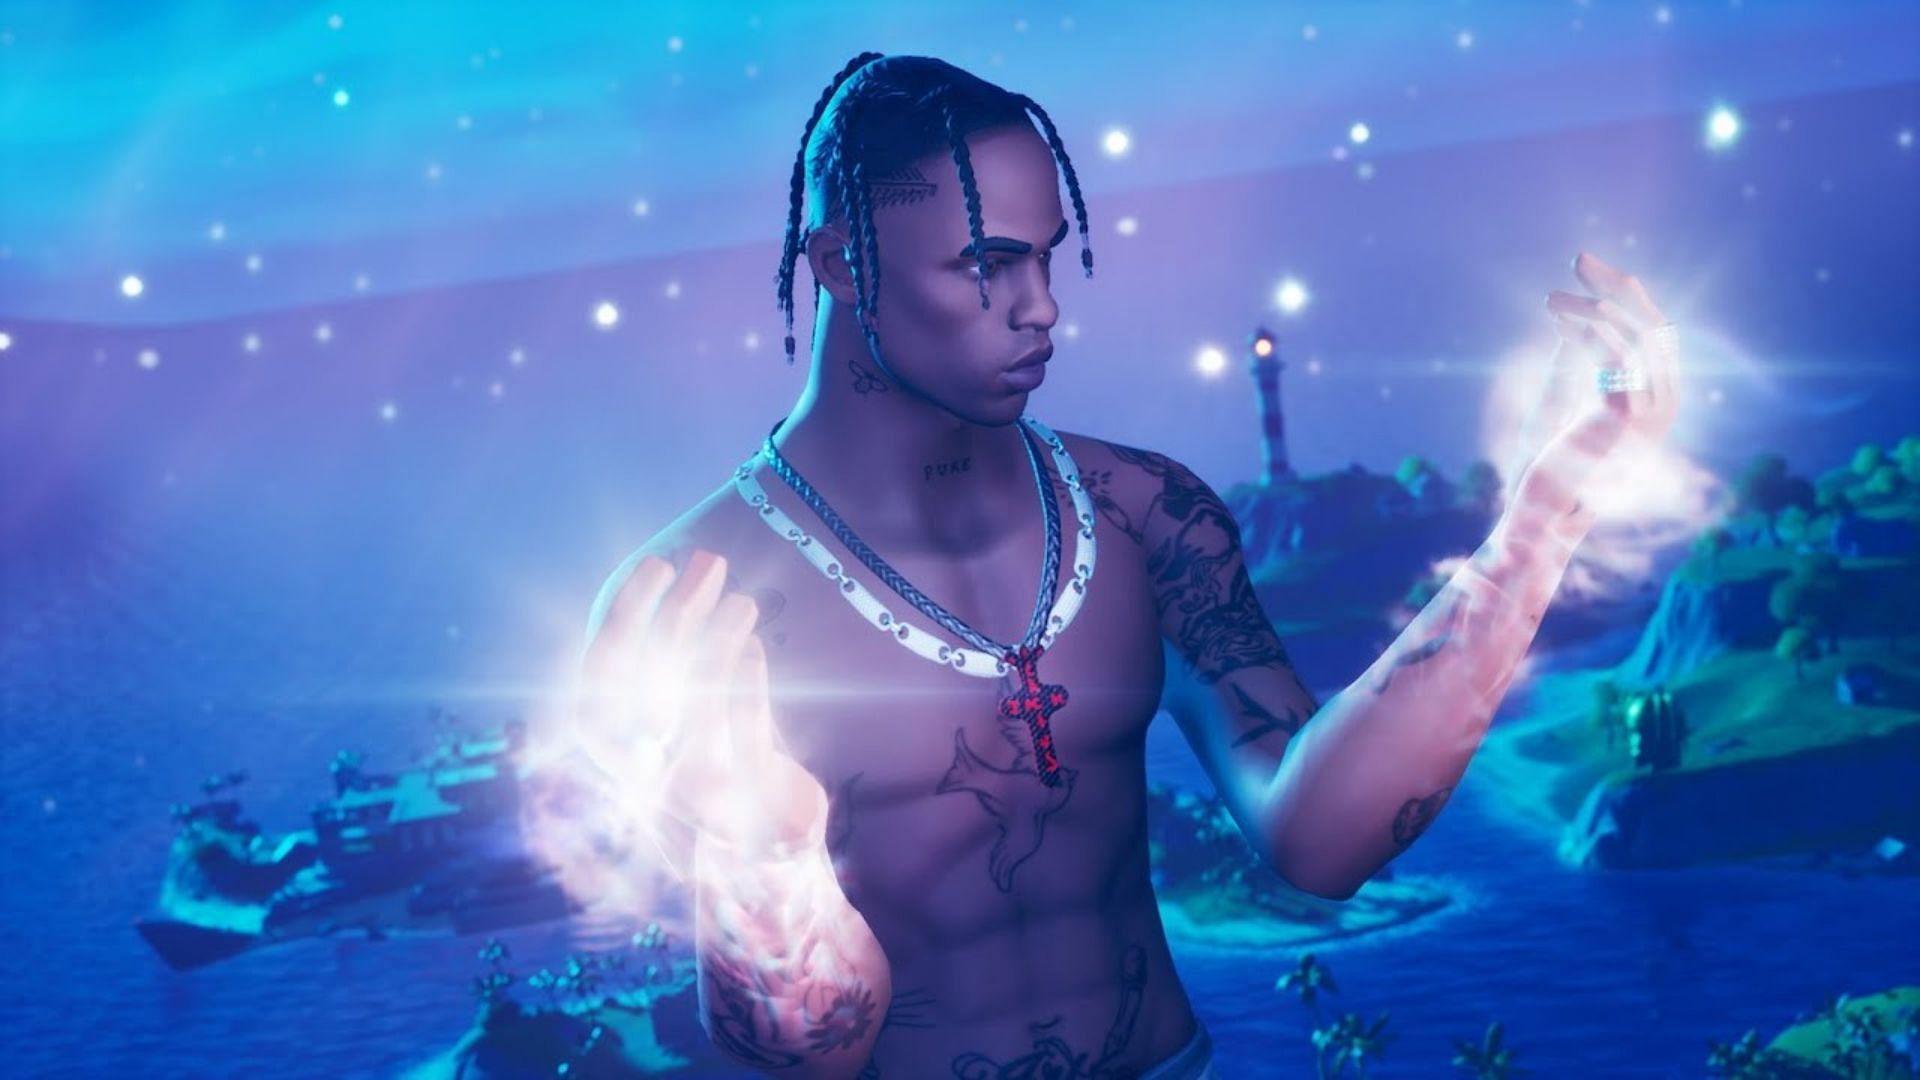 Is there going to be another live concert? (Image via Travis Scott on YouTube)